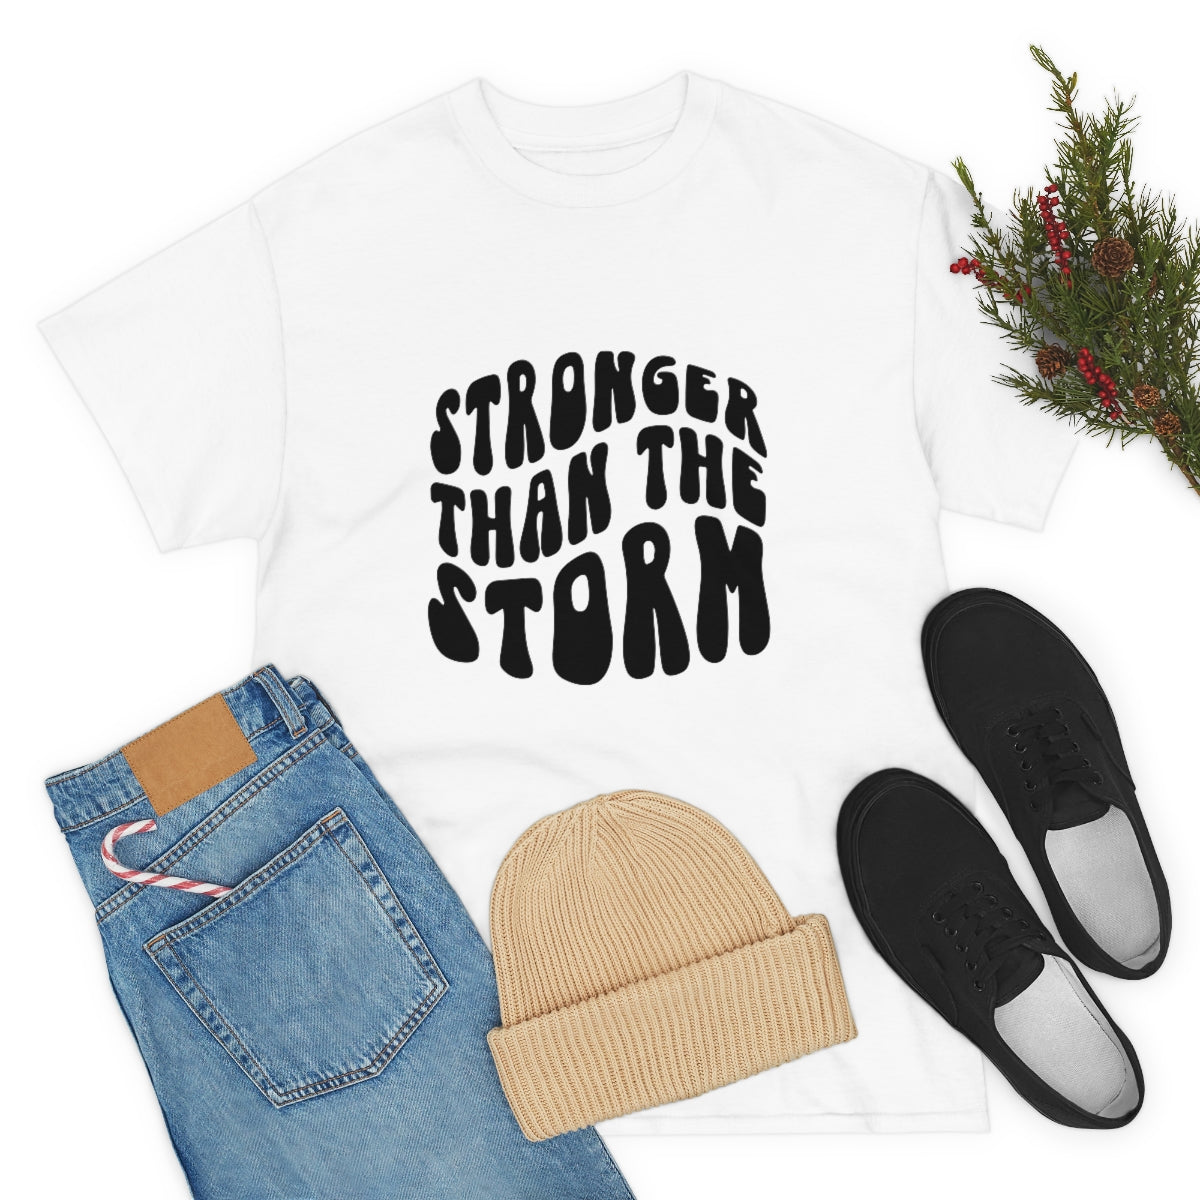 Stronger than the storm Unisex Heavy Cotton Tee